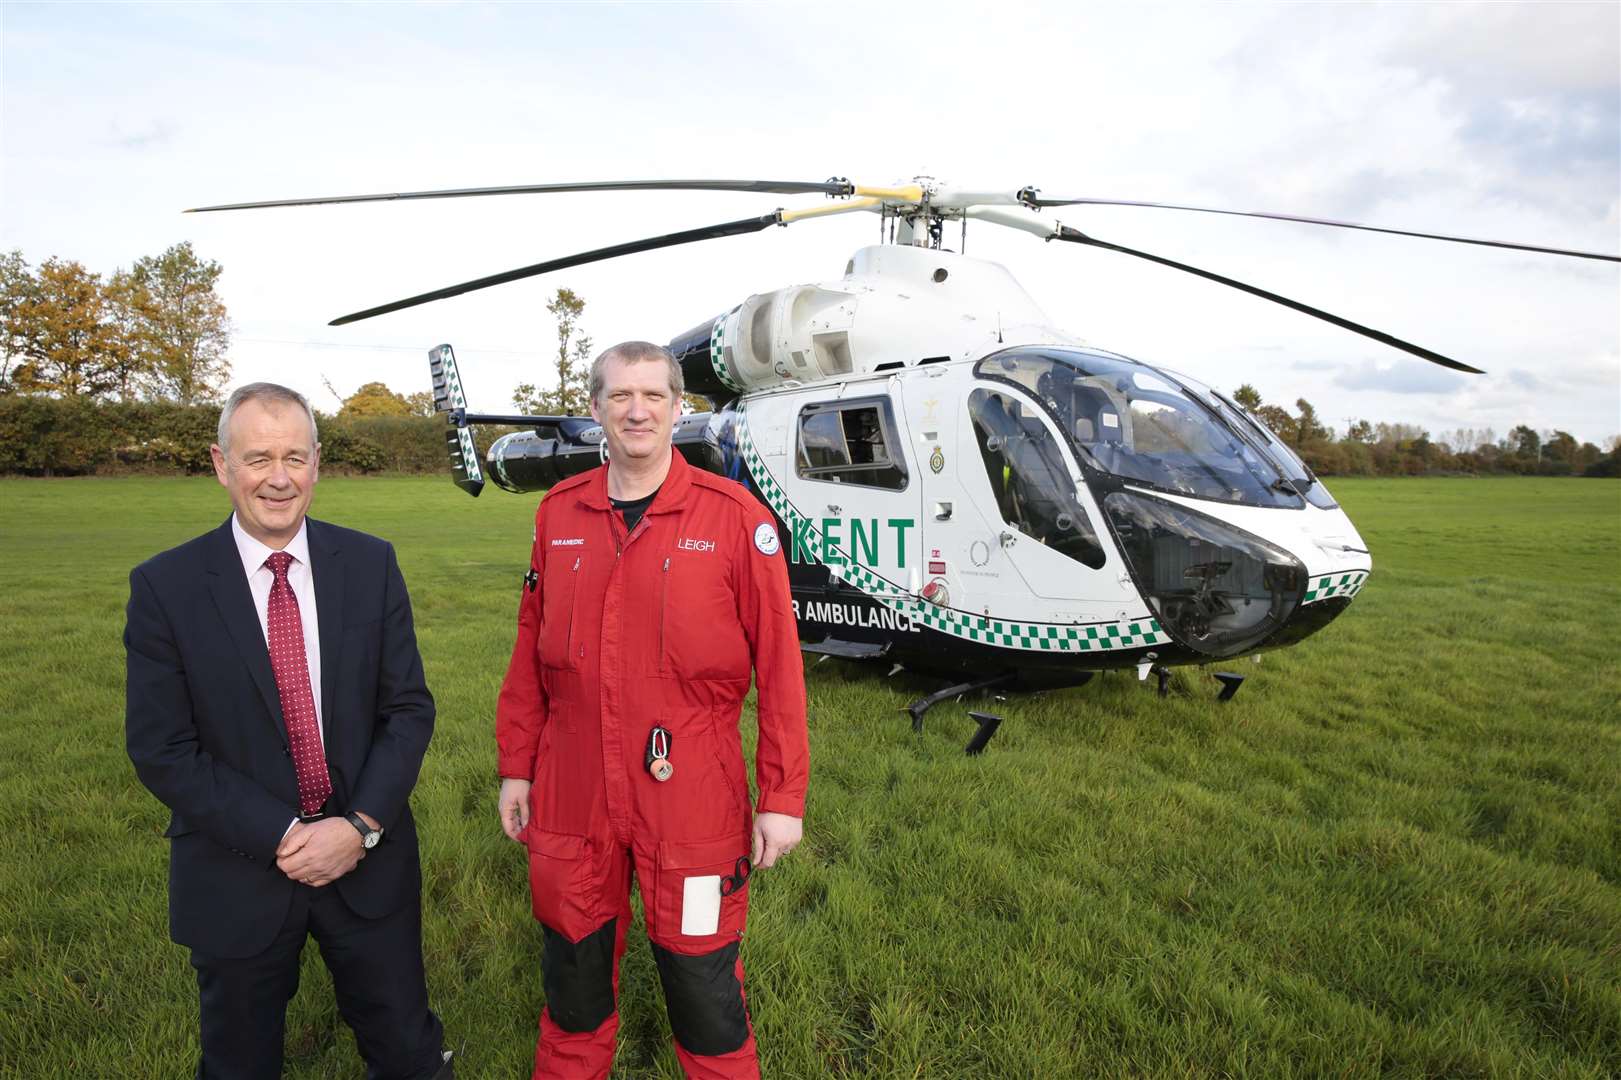 Chief executive Adrian Bell, pictured with Director of Operations Leigh Curtis, has left the air ambulance trust